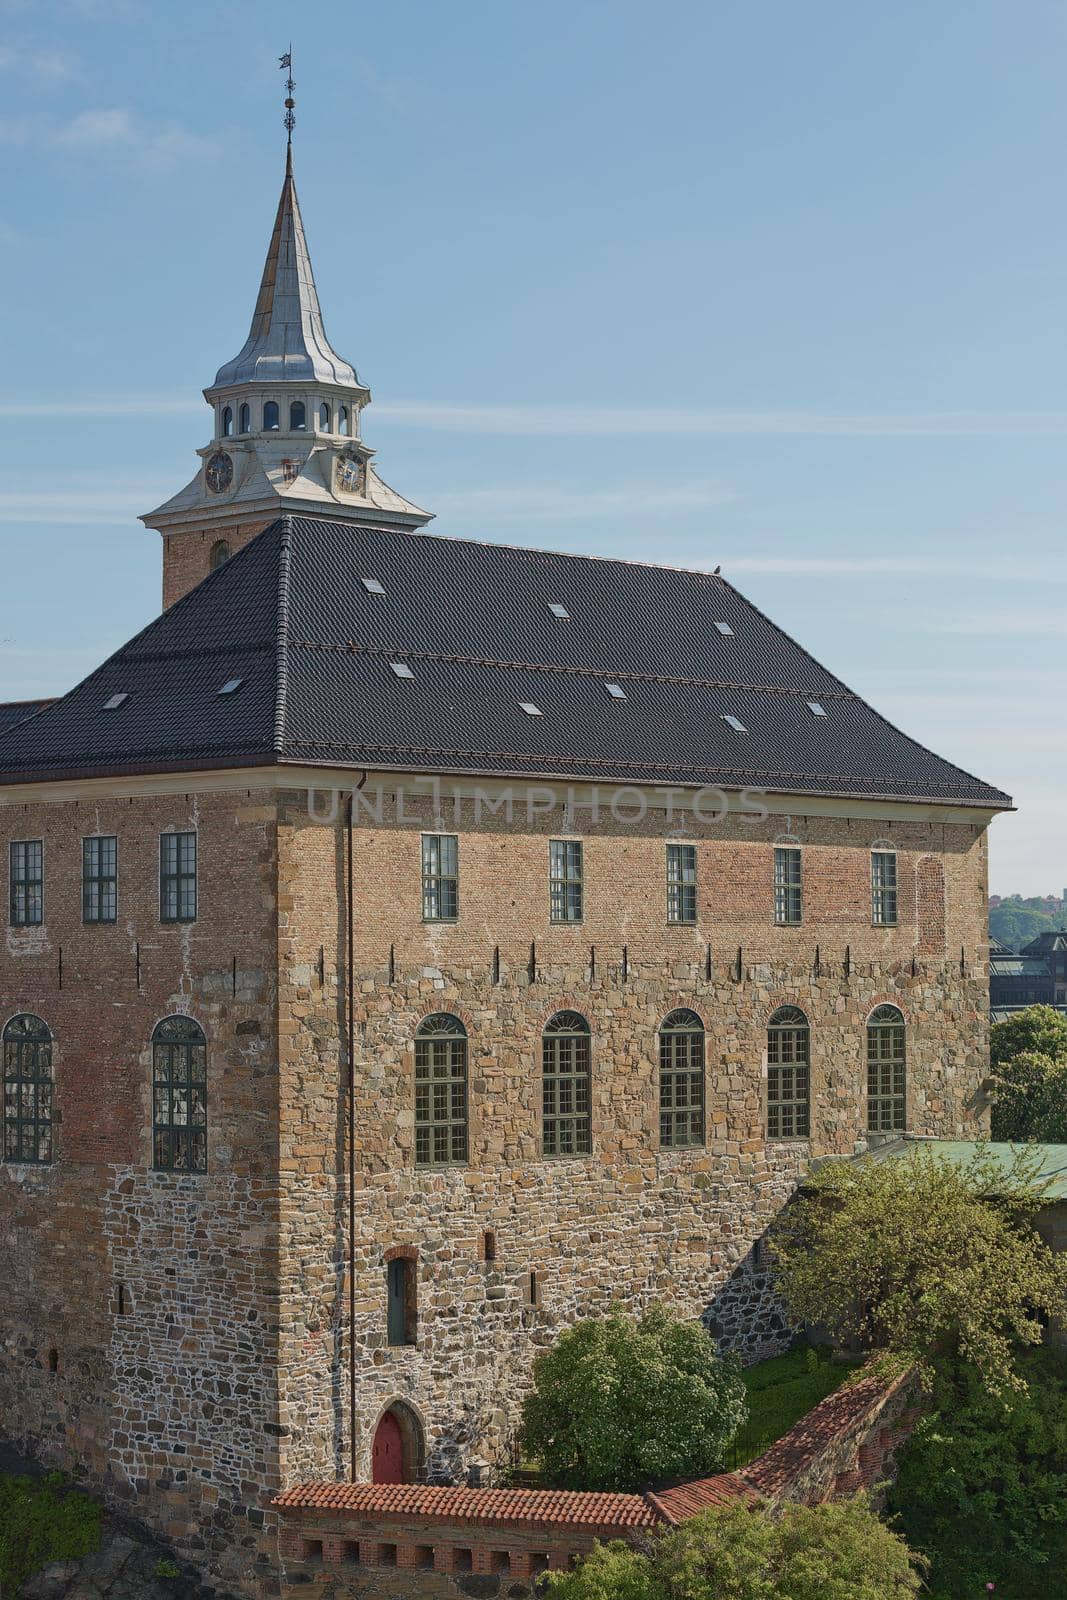 Akershus Fortress or Akershus Castle of Oslo in Norway is a medieval castle that was built to protect and provide a royal residence by wondry